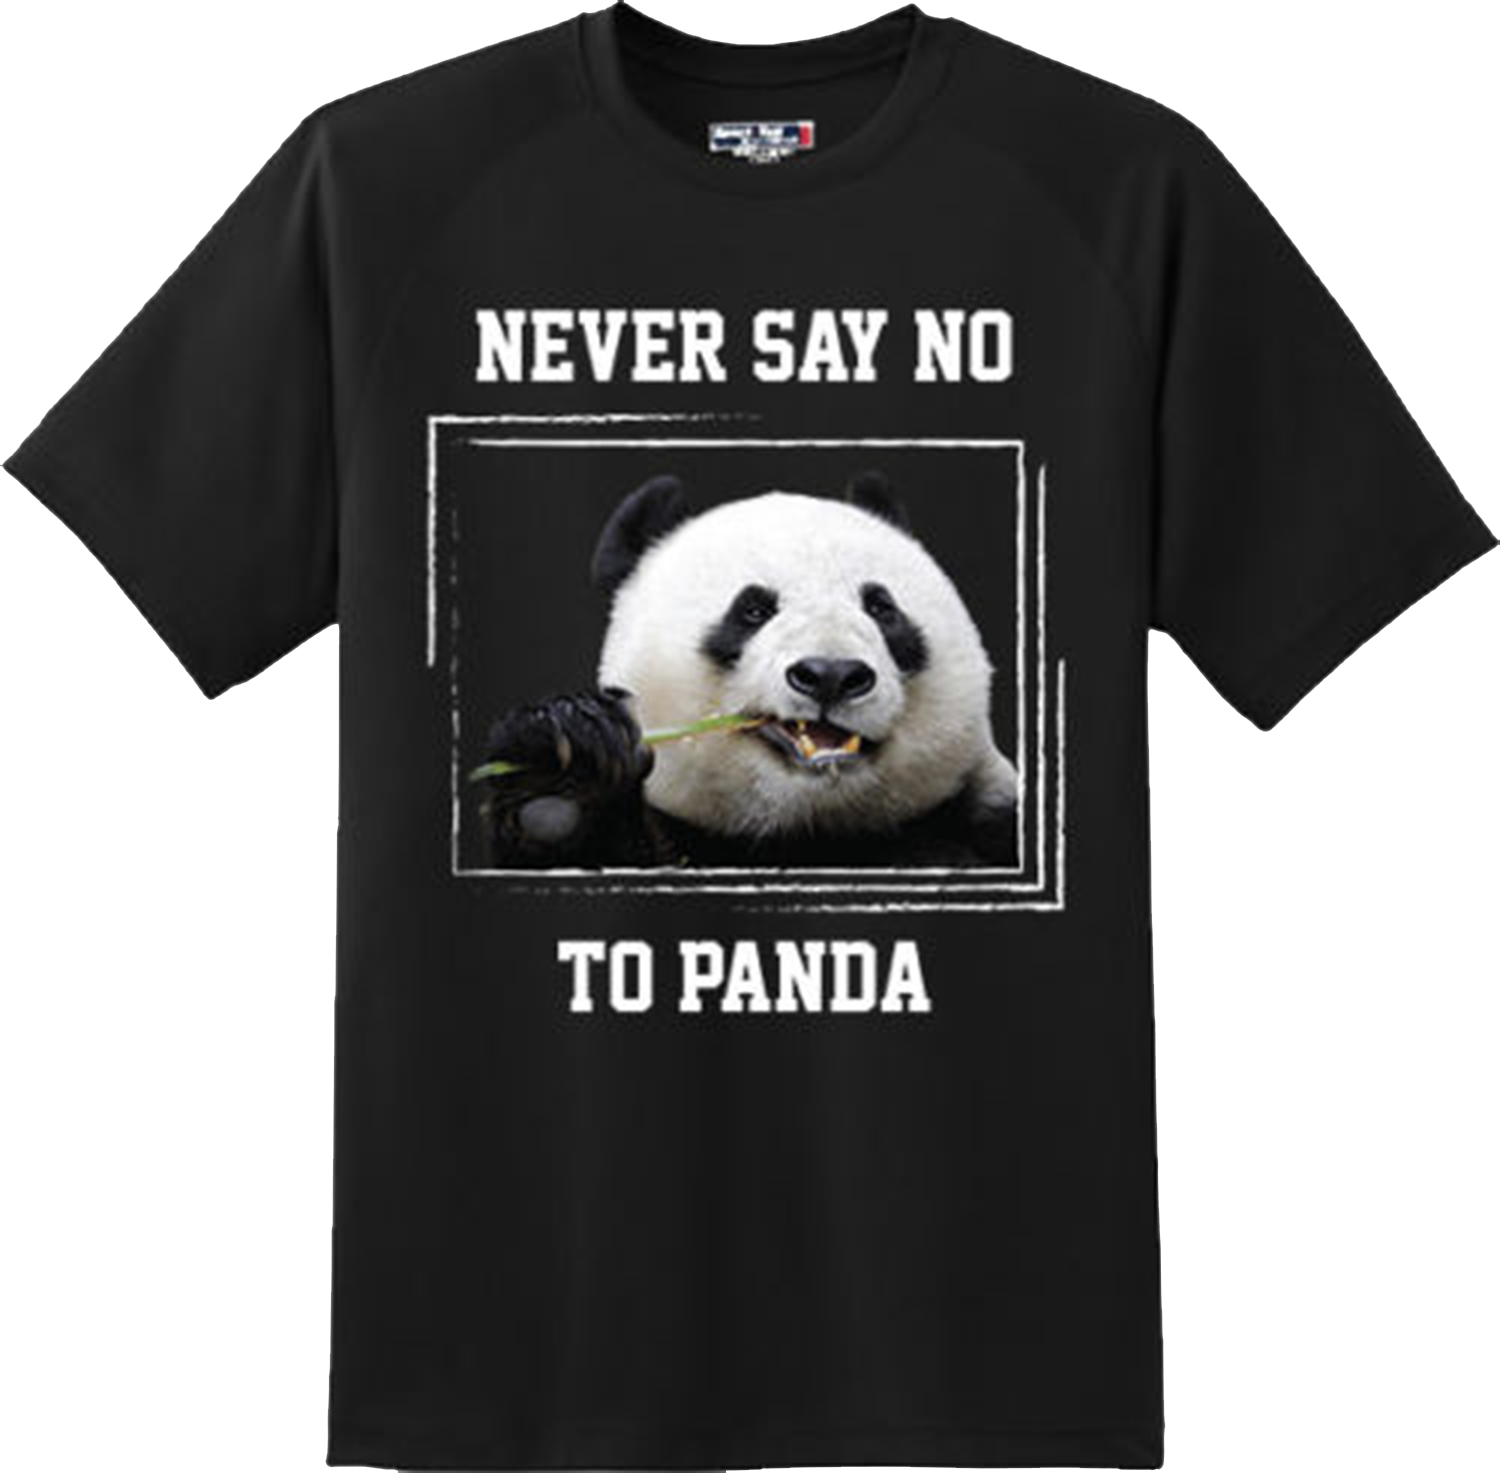 Funny Never say no to Panda Humor College Party Adult T Shirt New Graphic Tee